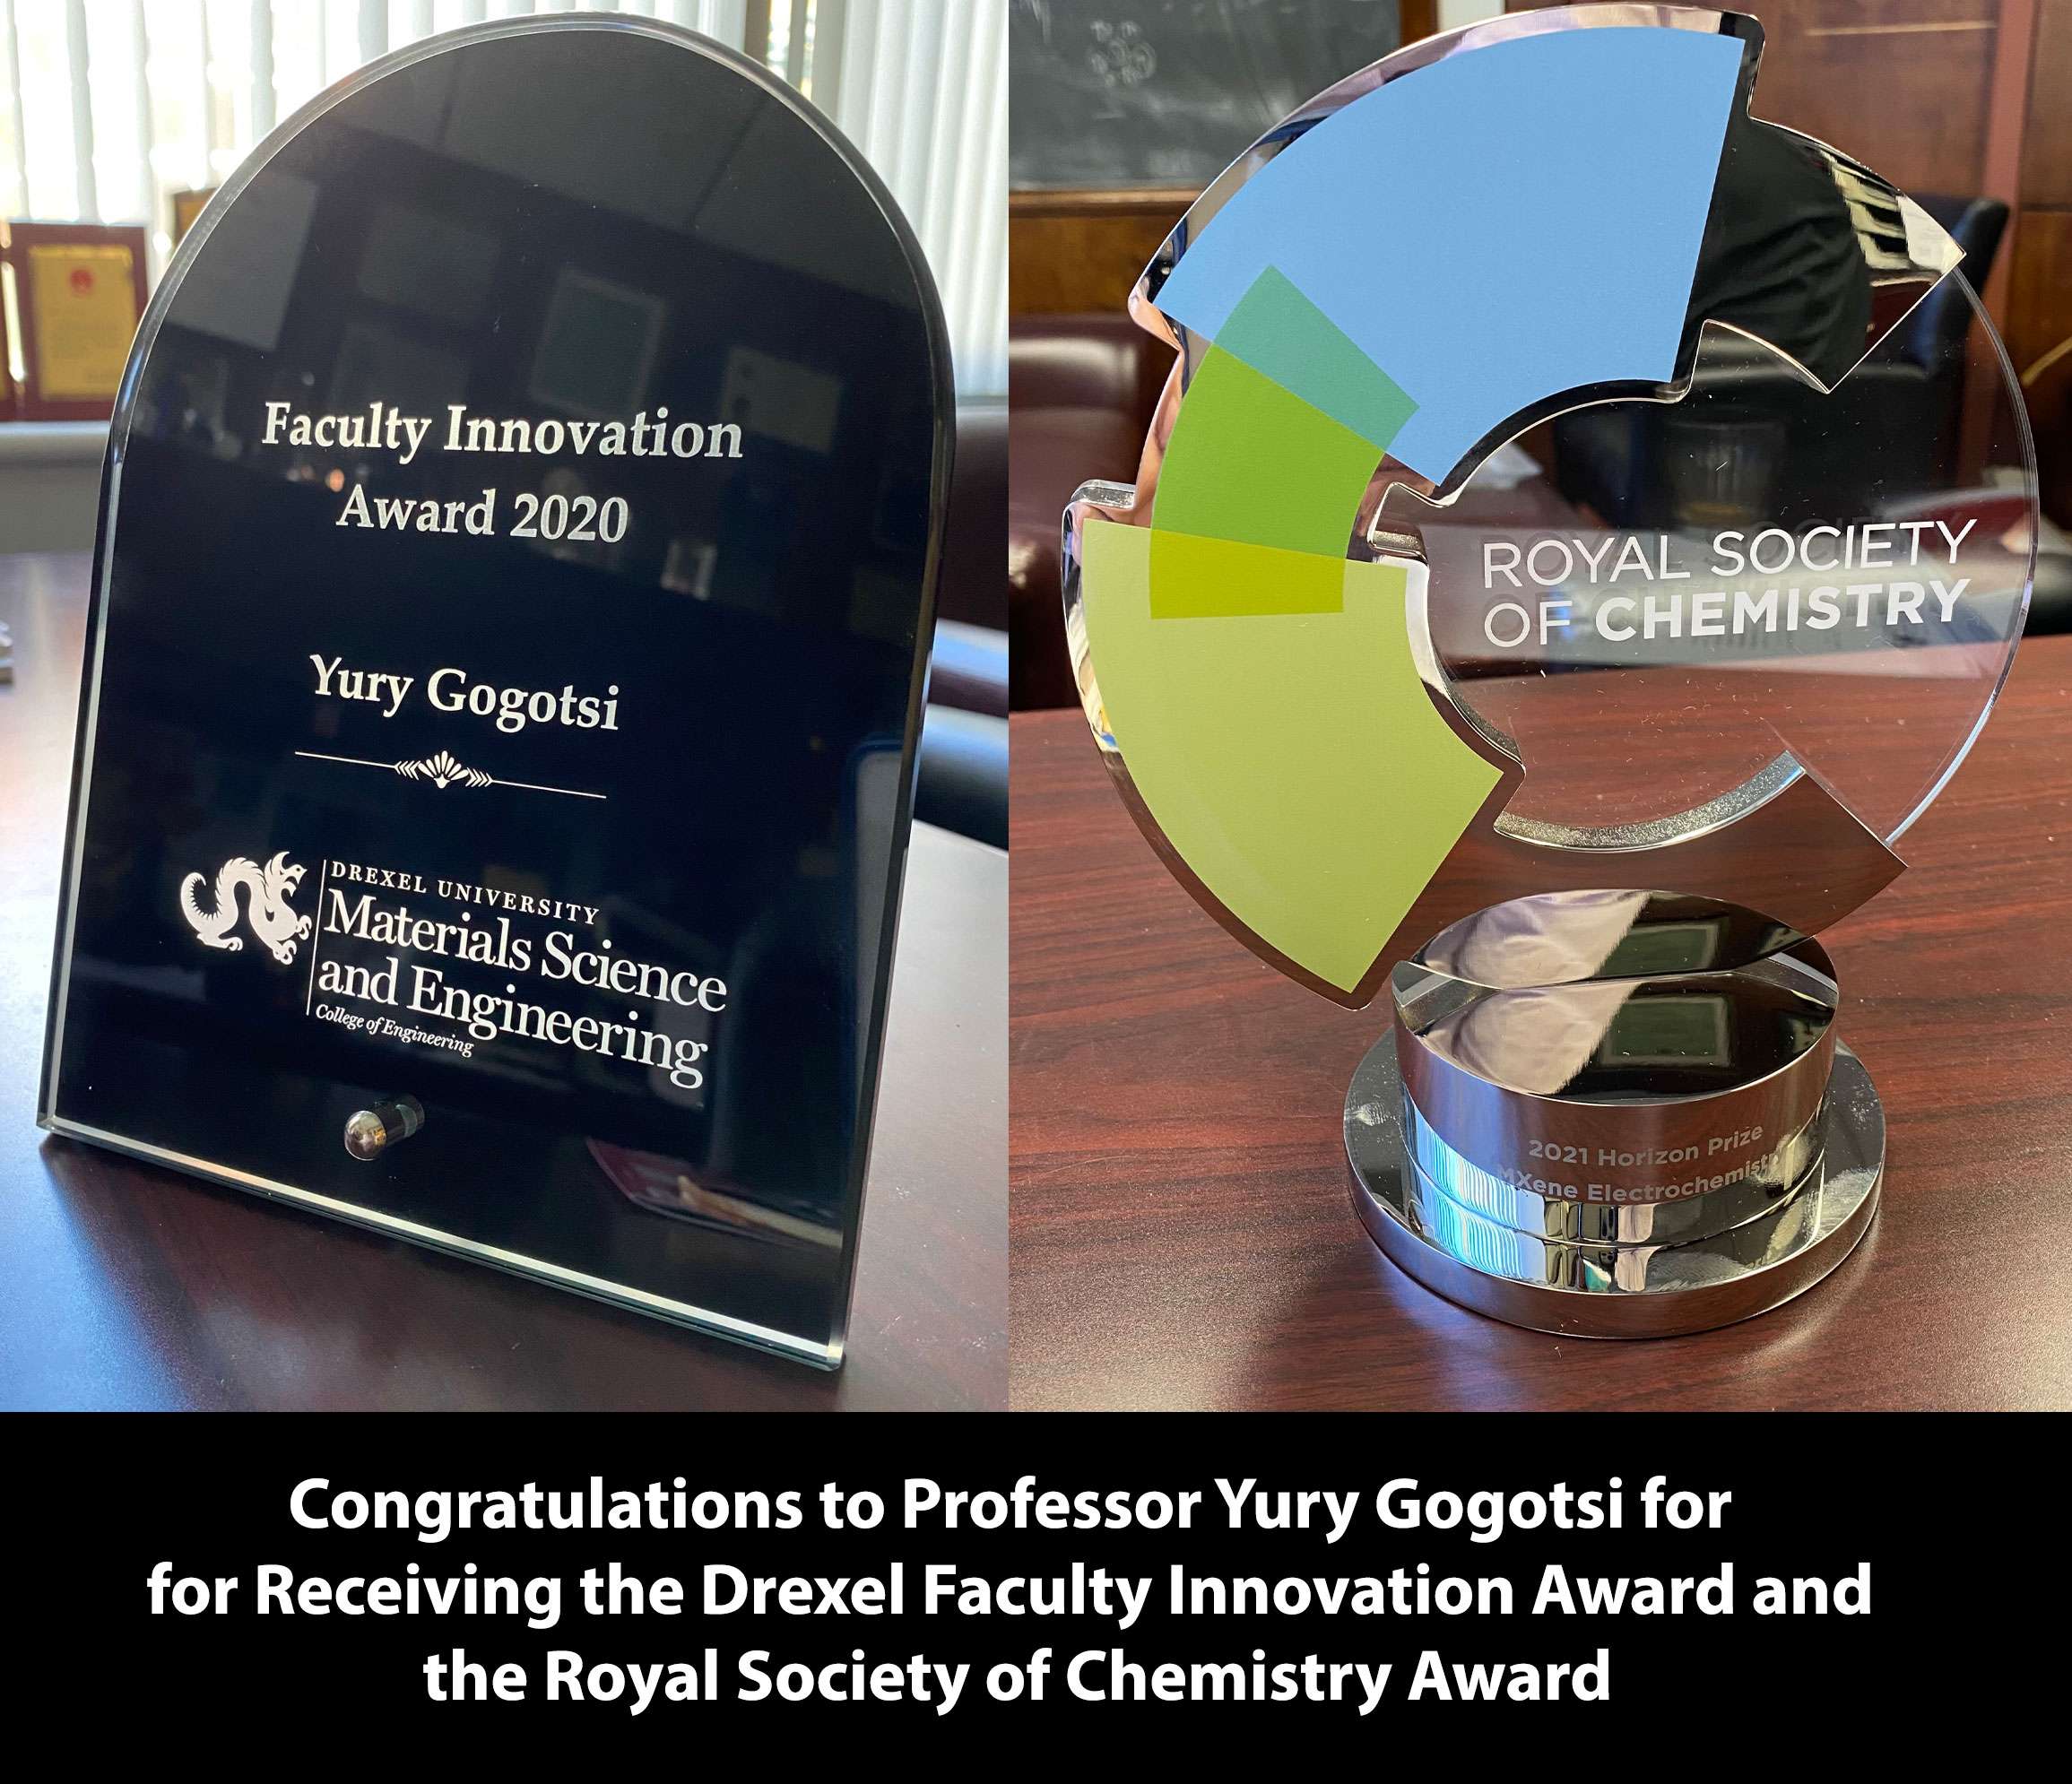 Congratulations to Professor Yury  Gogotsi for Receiving the Drexel Faculty Innovation Award and the Royal Society of Chemistry Award